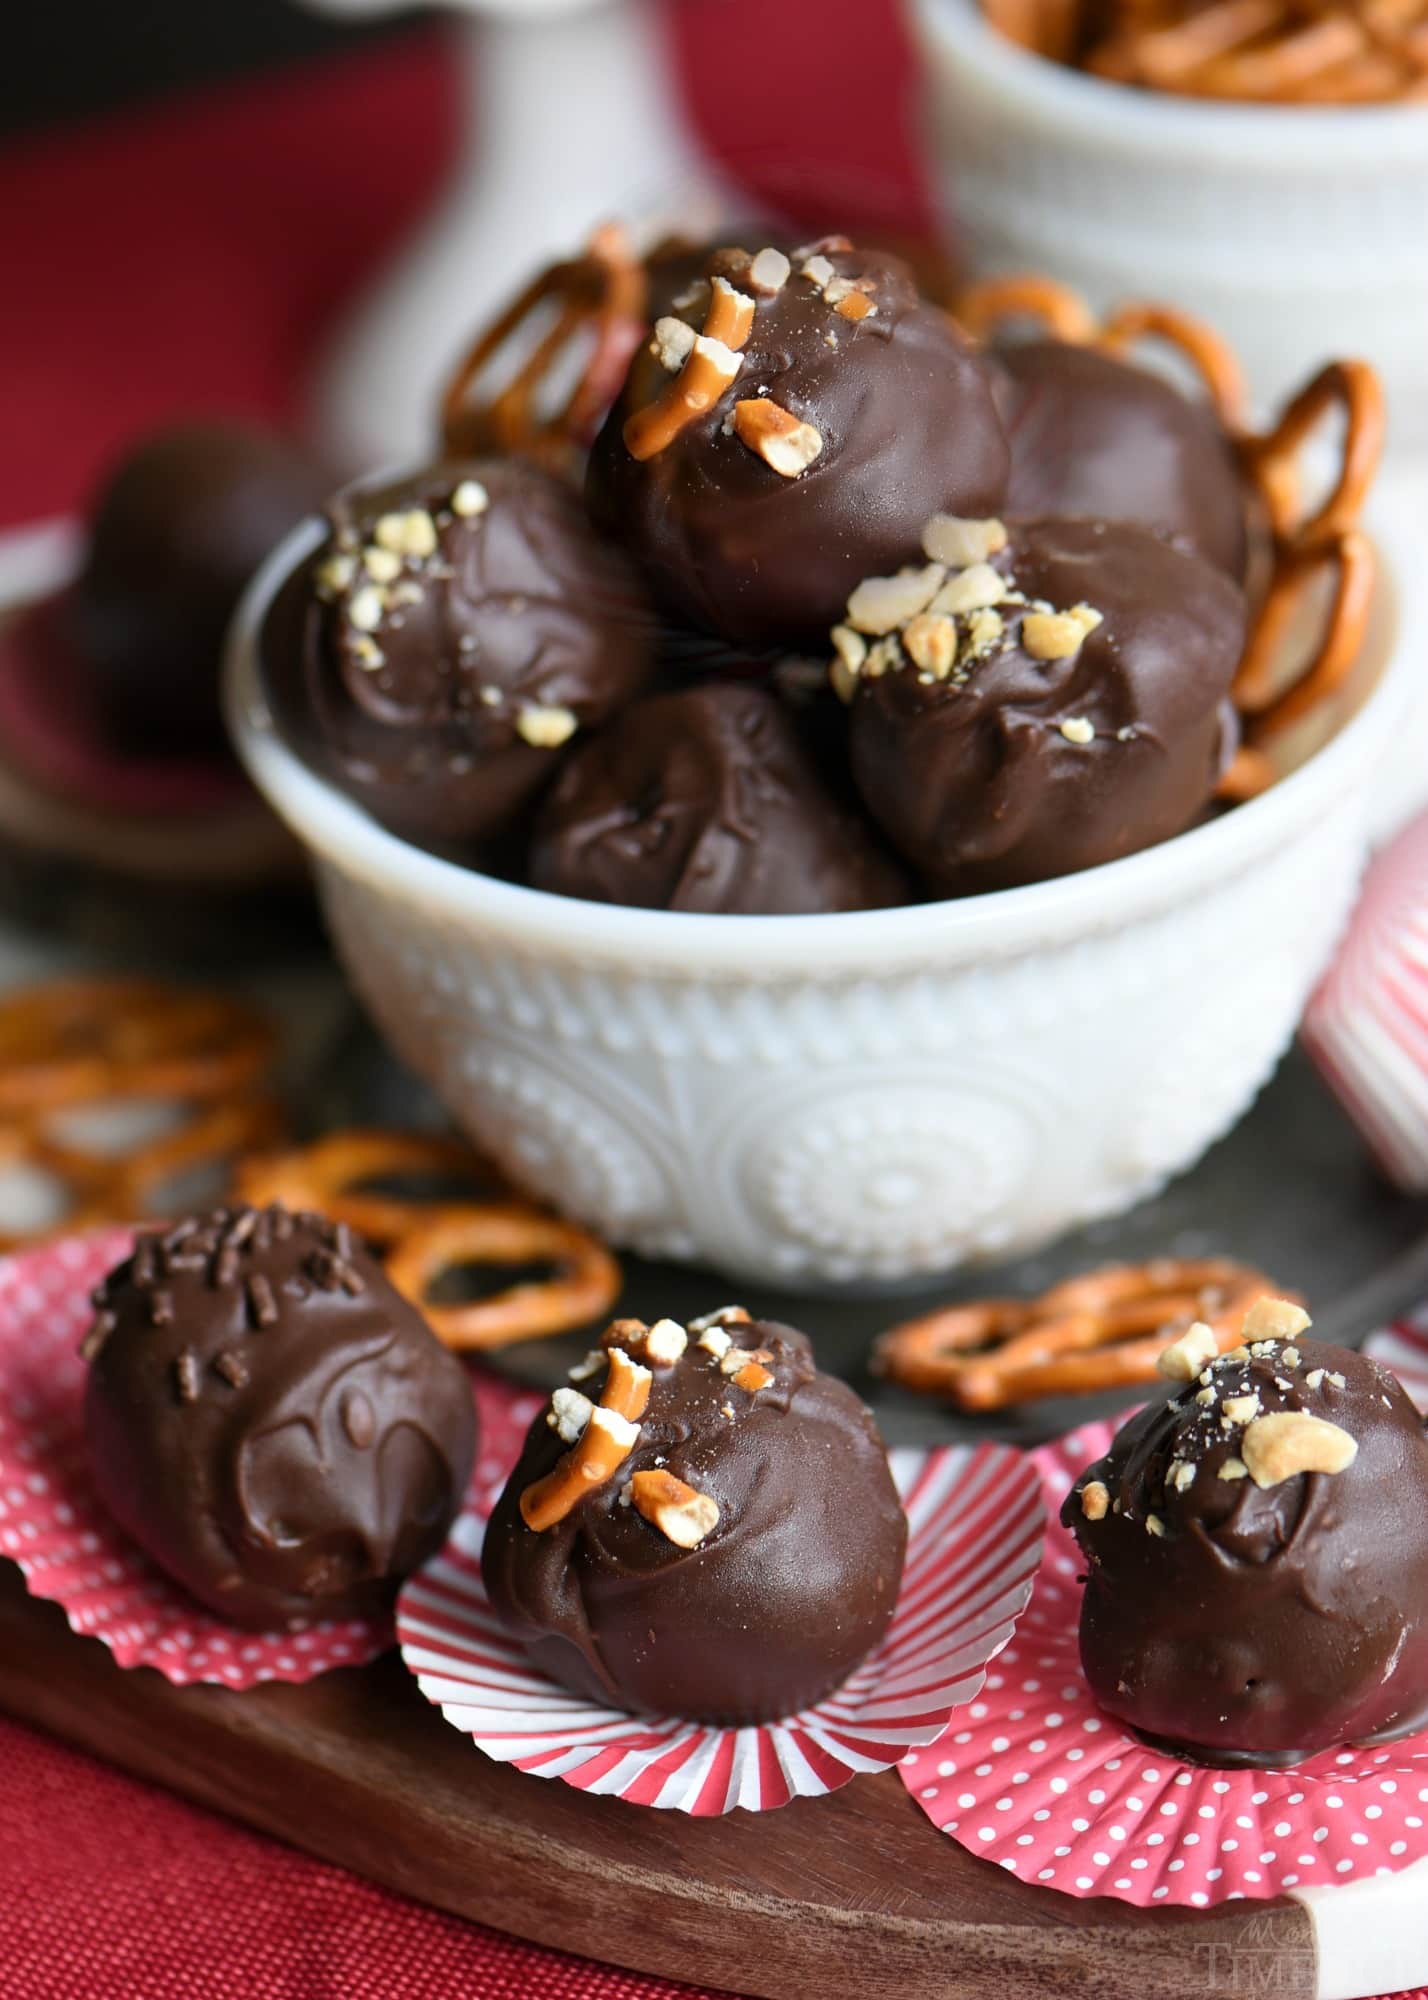 It's not a party without these easy Peanut Butter Pretzel Truffles! Extra creamy and delicious and loaded with peanut butter, chocolate chips, and pretzels! The ultimate sweet and salty combination! // Mom On Timeout #peanutbutter #pretzel #chocolate #candy #truffle #recipe 